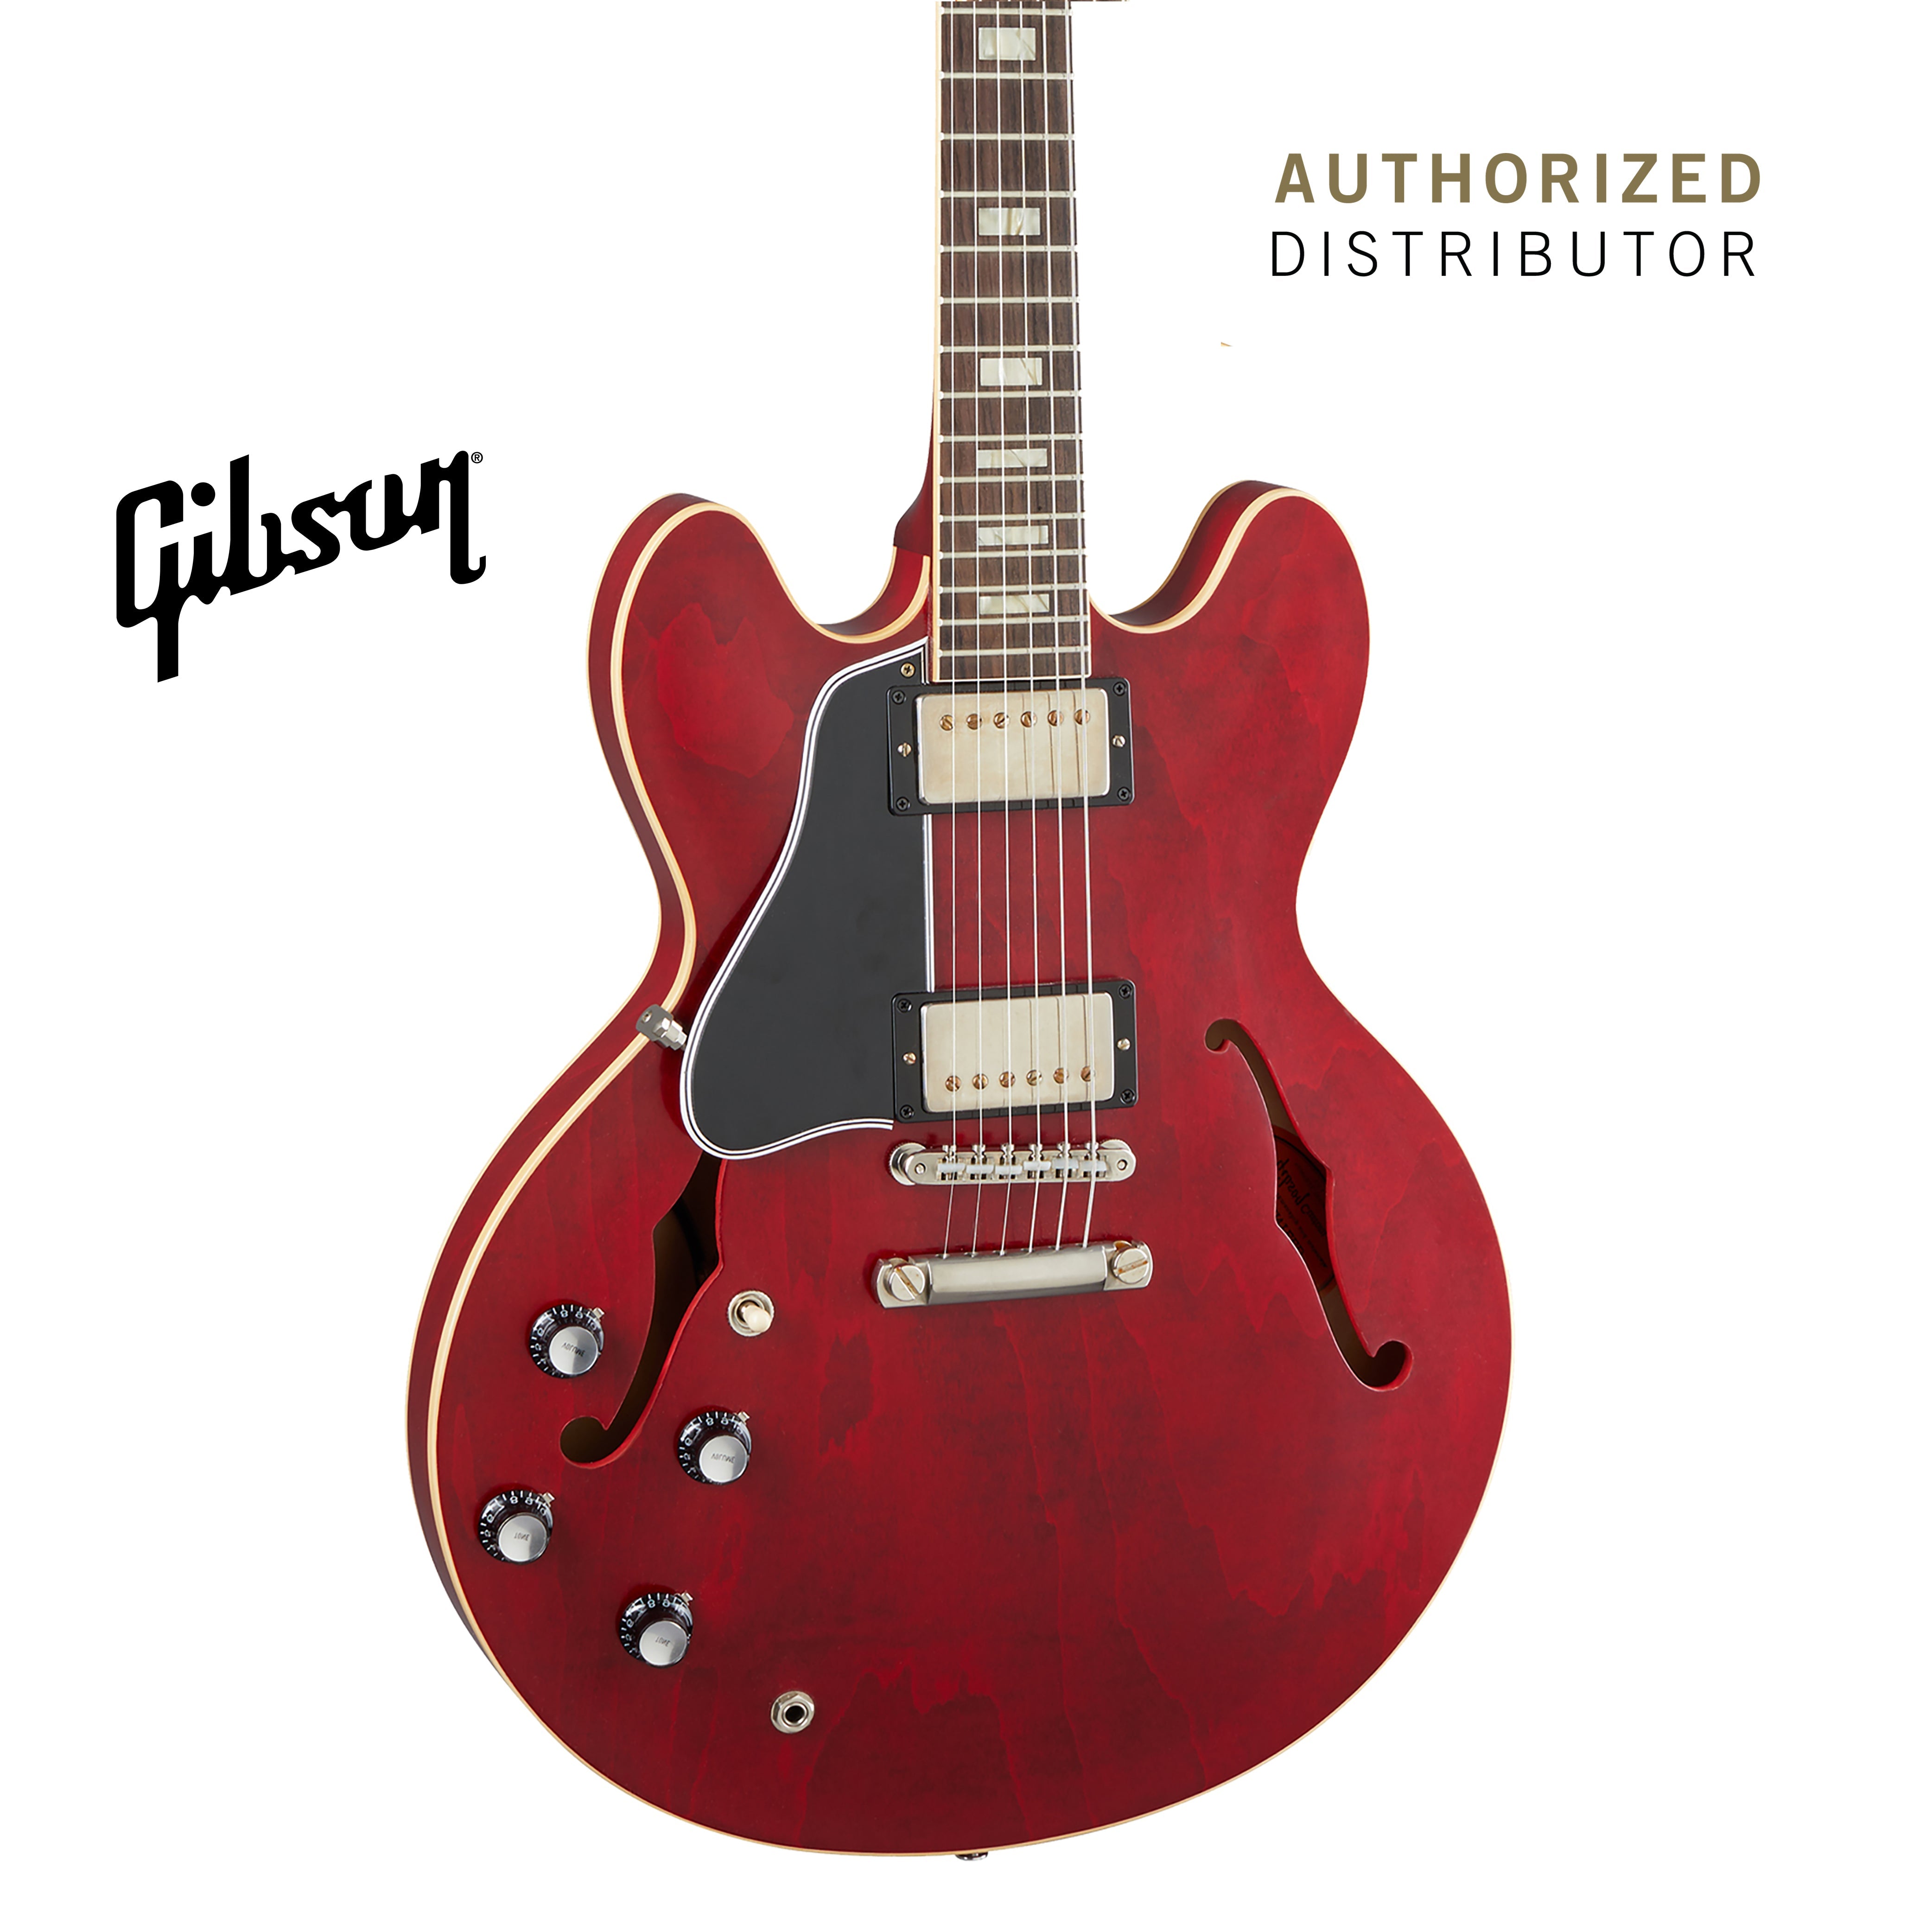 GIBSON 1964 ES-335 REISSUE VOS SEMI-HOLLOWBODY LEFT-HANDED ELECTRIC GUITAR - 60S CHERRY